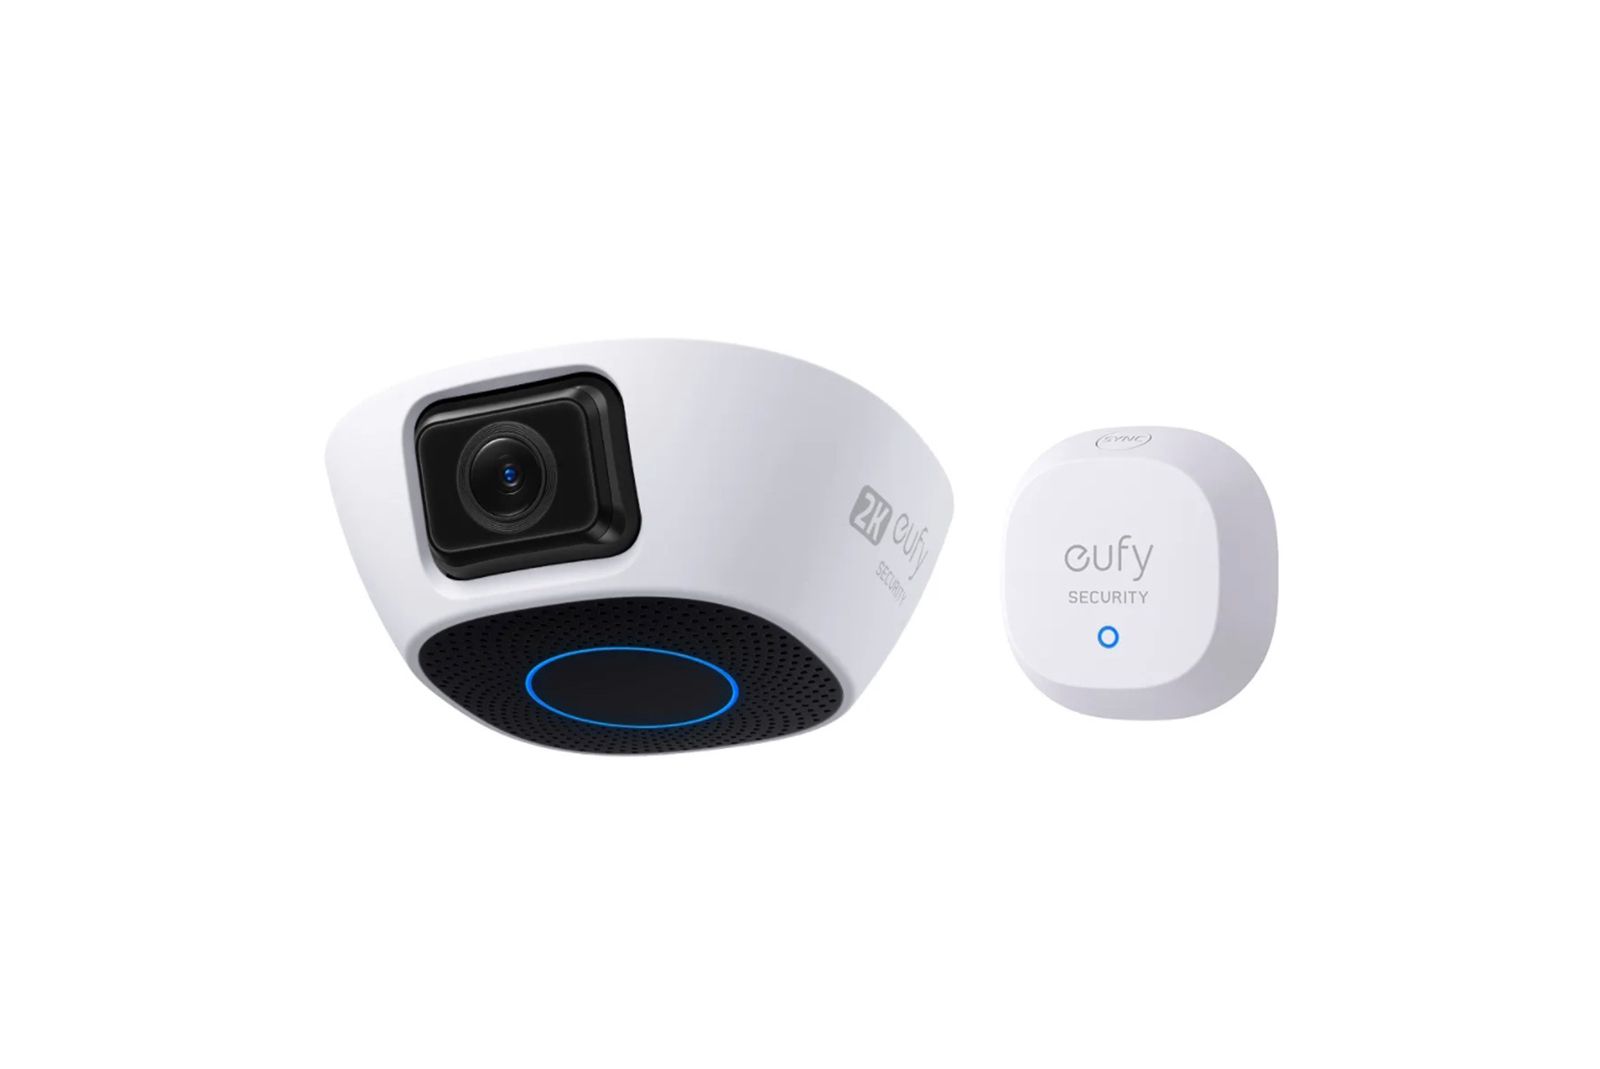 Eufy's new video doorbell has two cameras for person and package detection photo 1